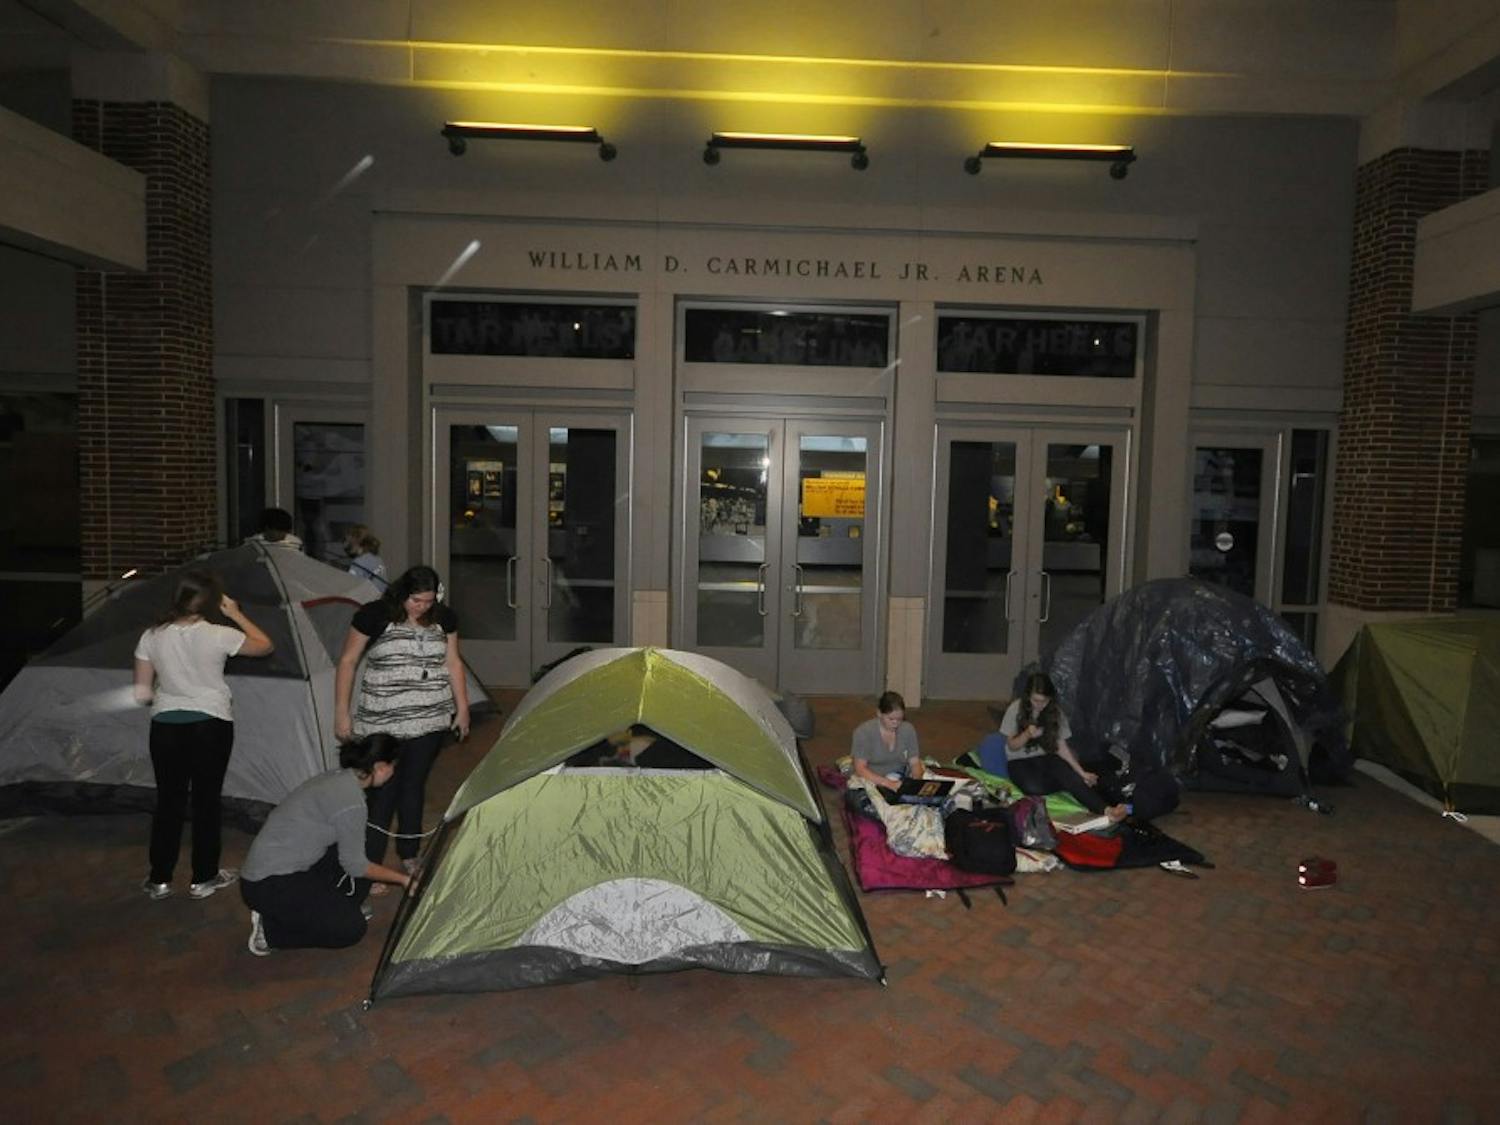 	President Barack Obama will visit UNC&#8217;s campus to give a speech in Carmichael Arena and tape an episode of Late Night with Jimmy Fallon on Tuesday. In the days leading up to the events, students wait in line for tickets to the speech and the taping.